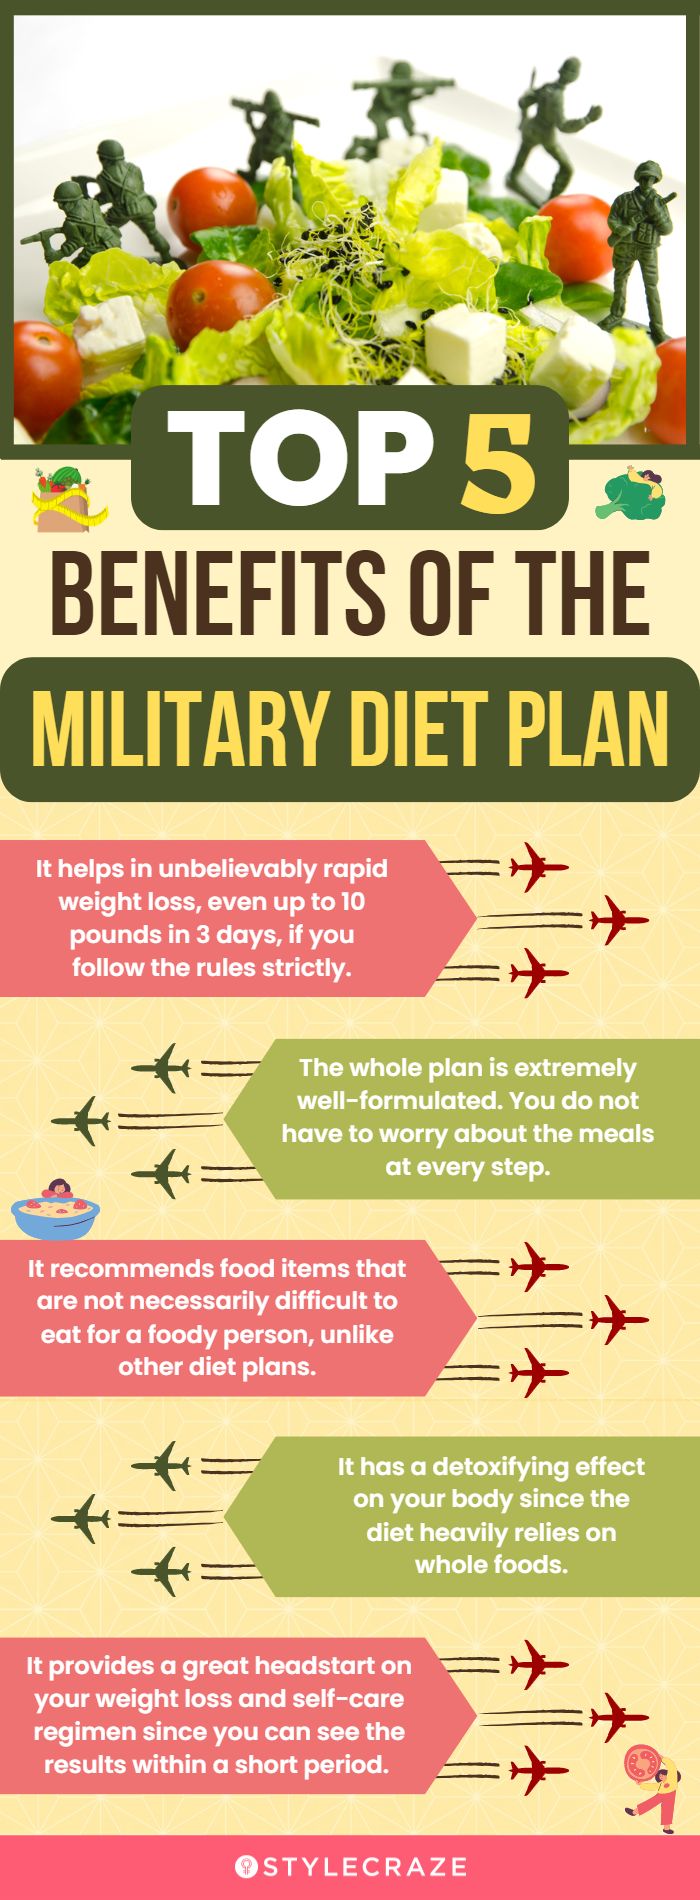 top 5 benefits of the military diet plan (infographic)